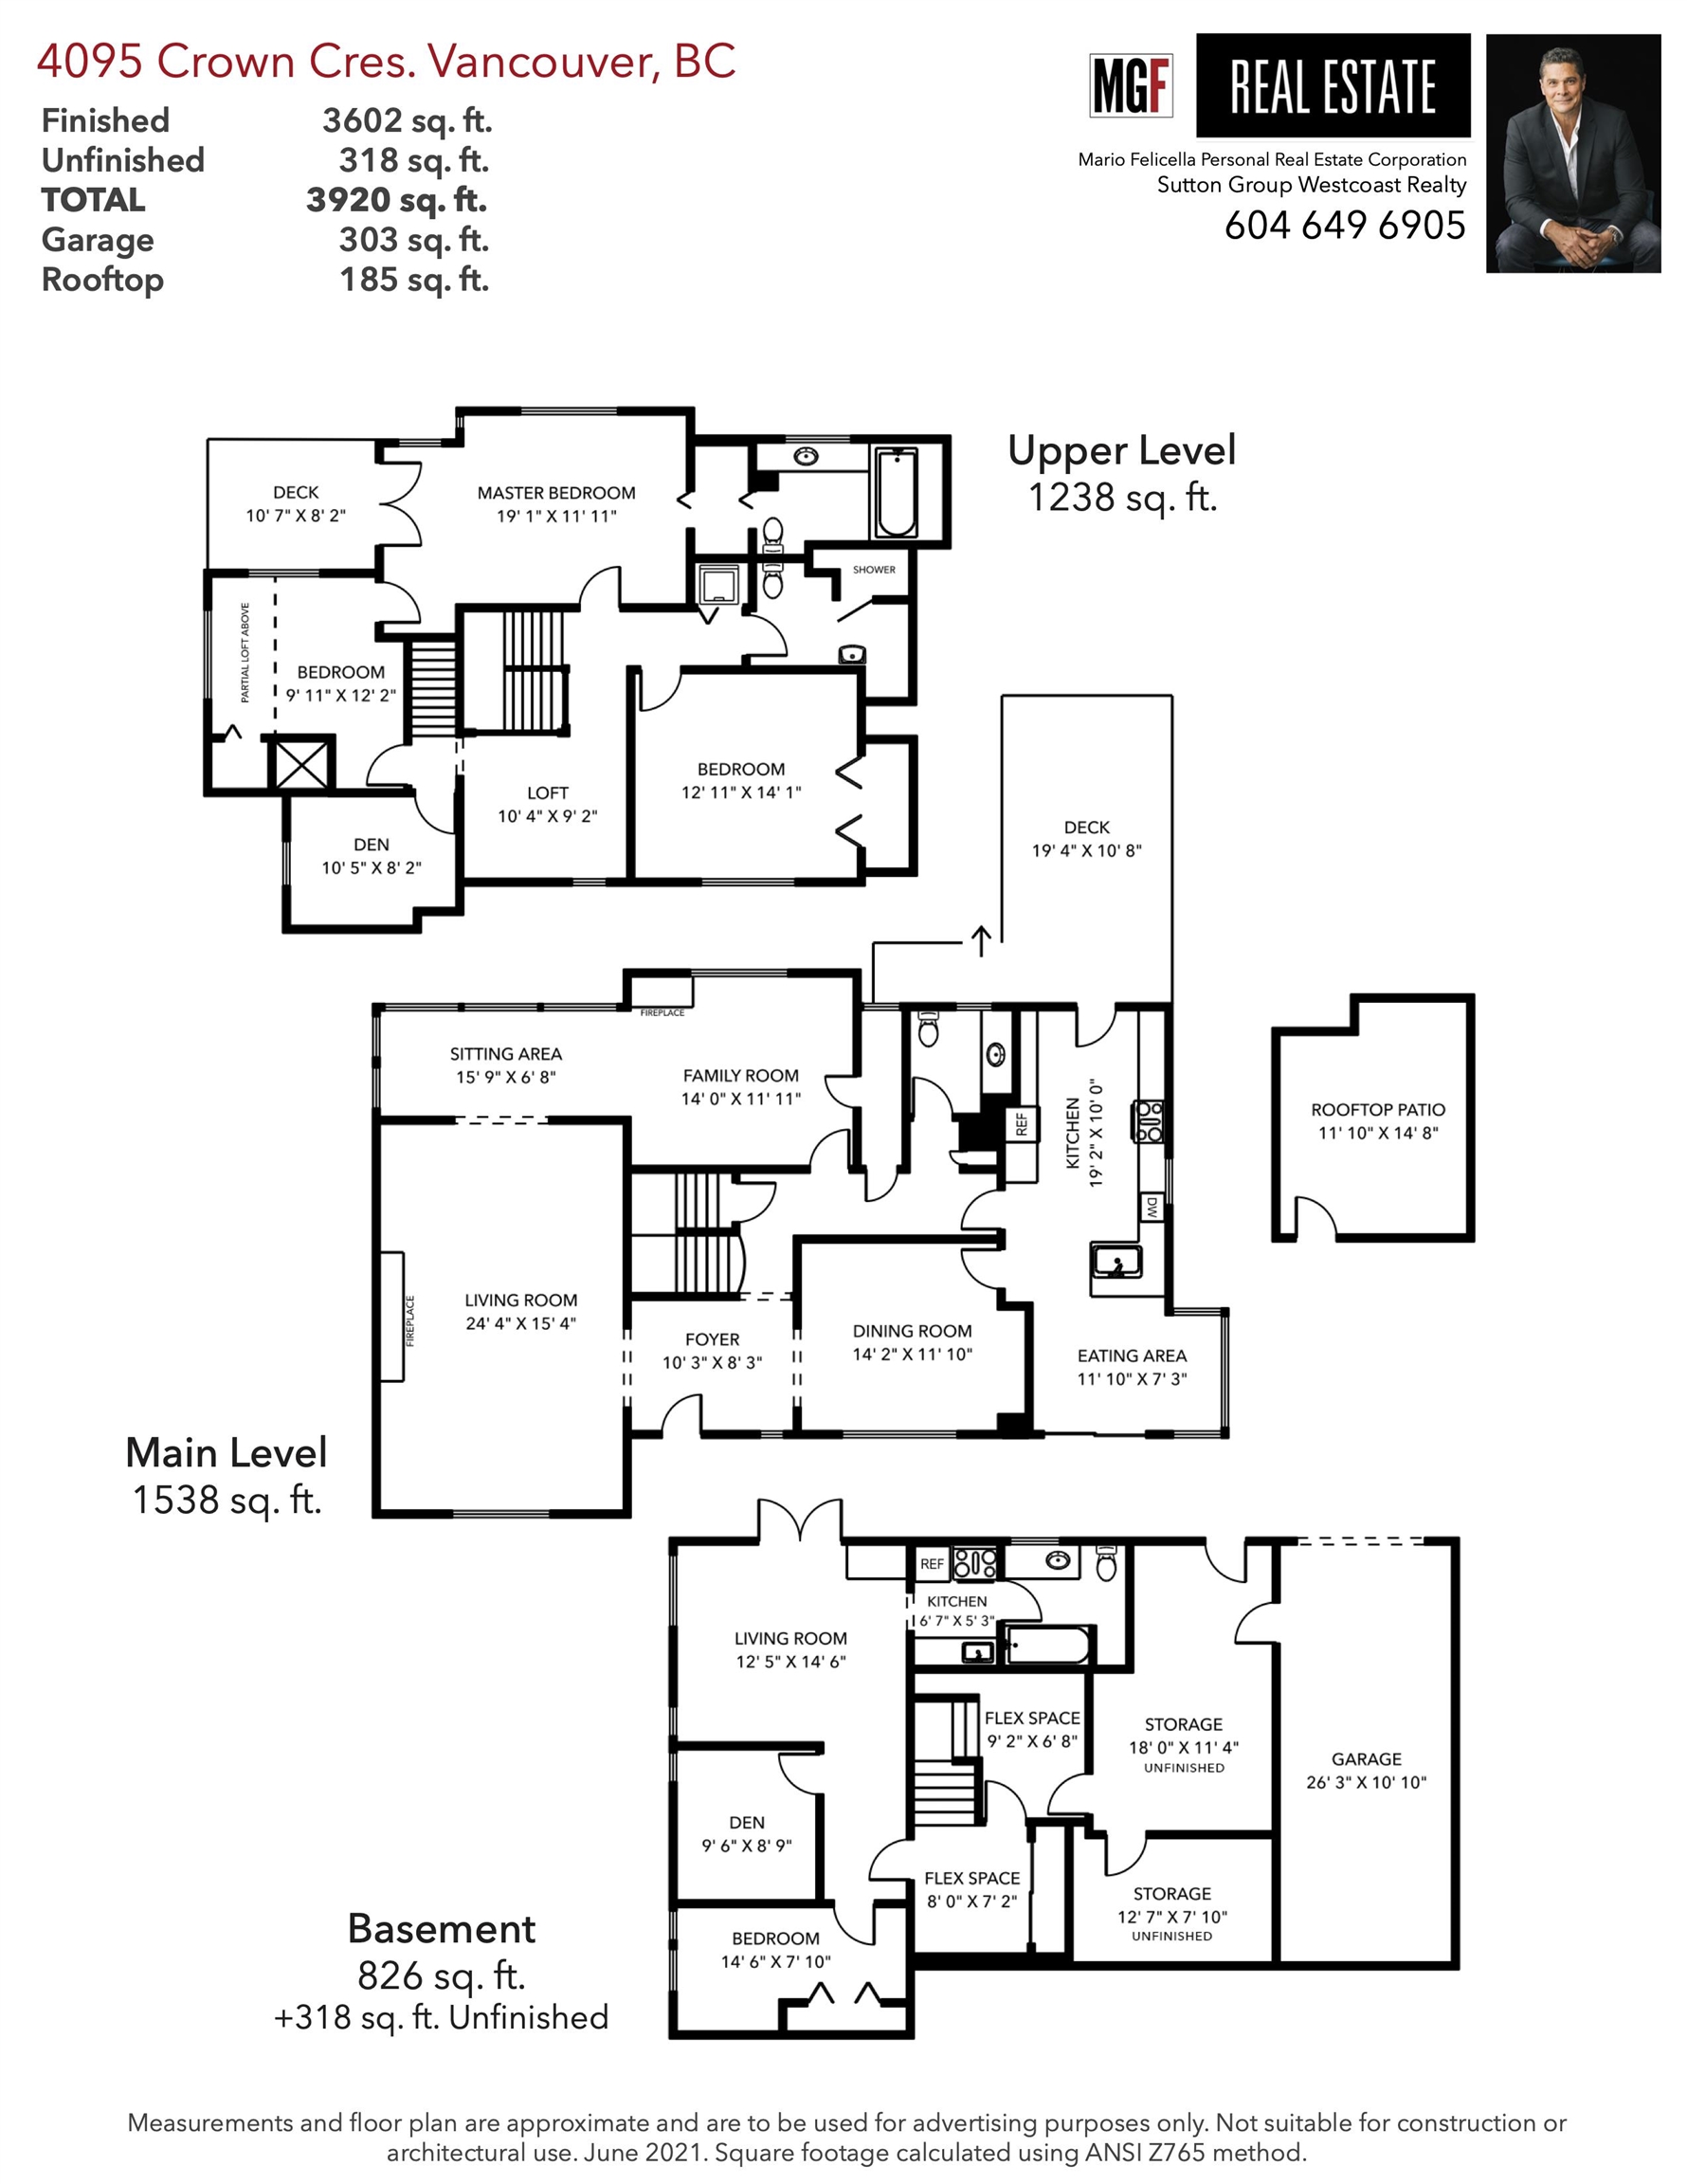 Listing image of 4095 CROWN CRESCENT